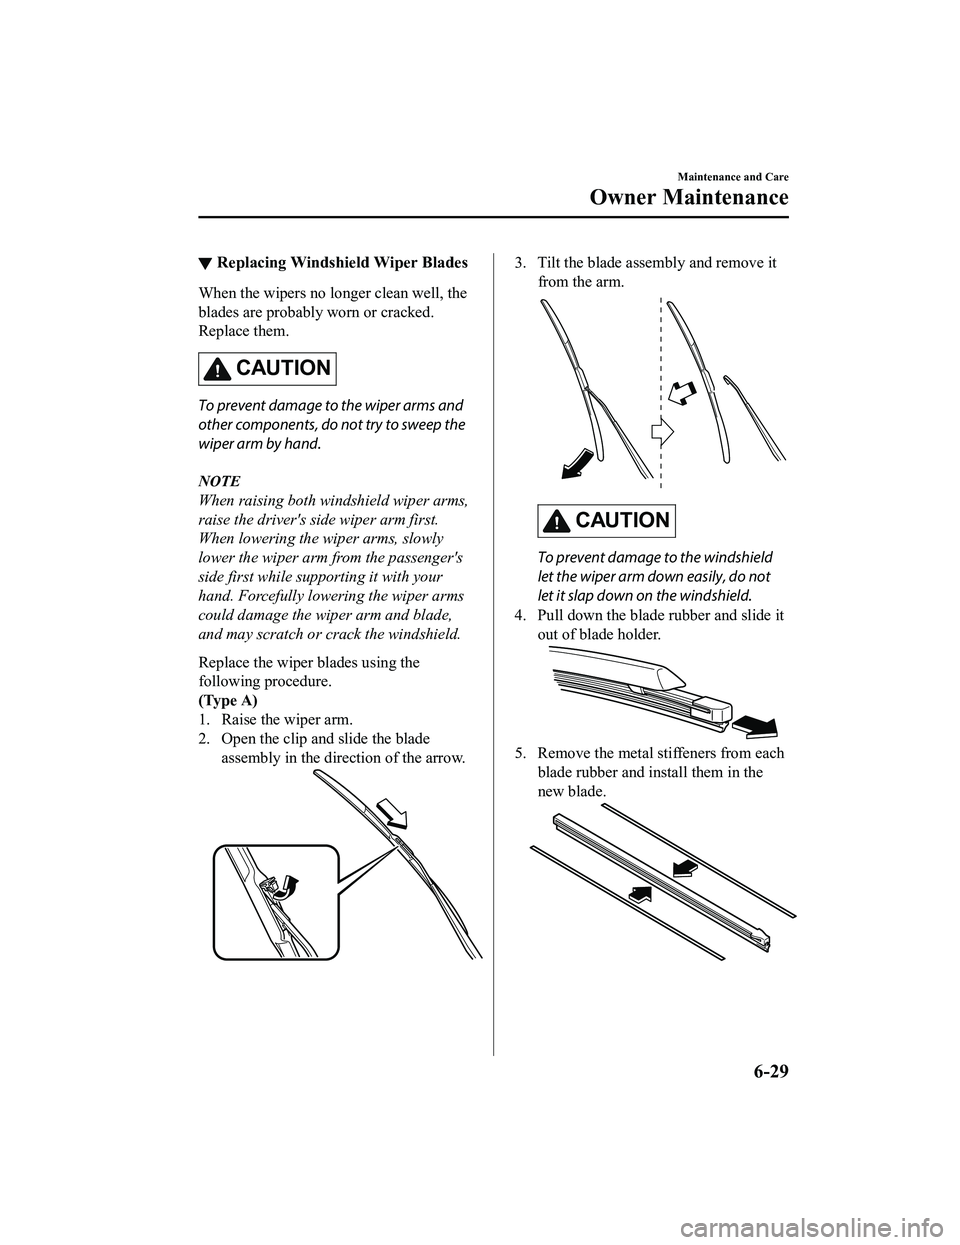 MAZDA MODEL MX-5 MIATA RF 2020  Owners Manual ▼Replacing Windshield Wiper Blades
When the wipers no longer clean well, the
blades are probably worn or cracked.
Replace them.
CAUTION
To prevent damage to the wiper arms and
other components, do n